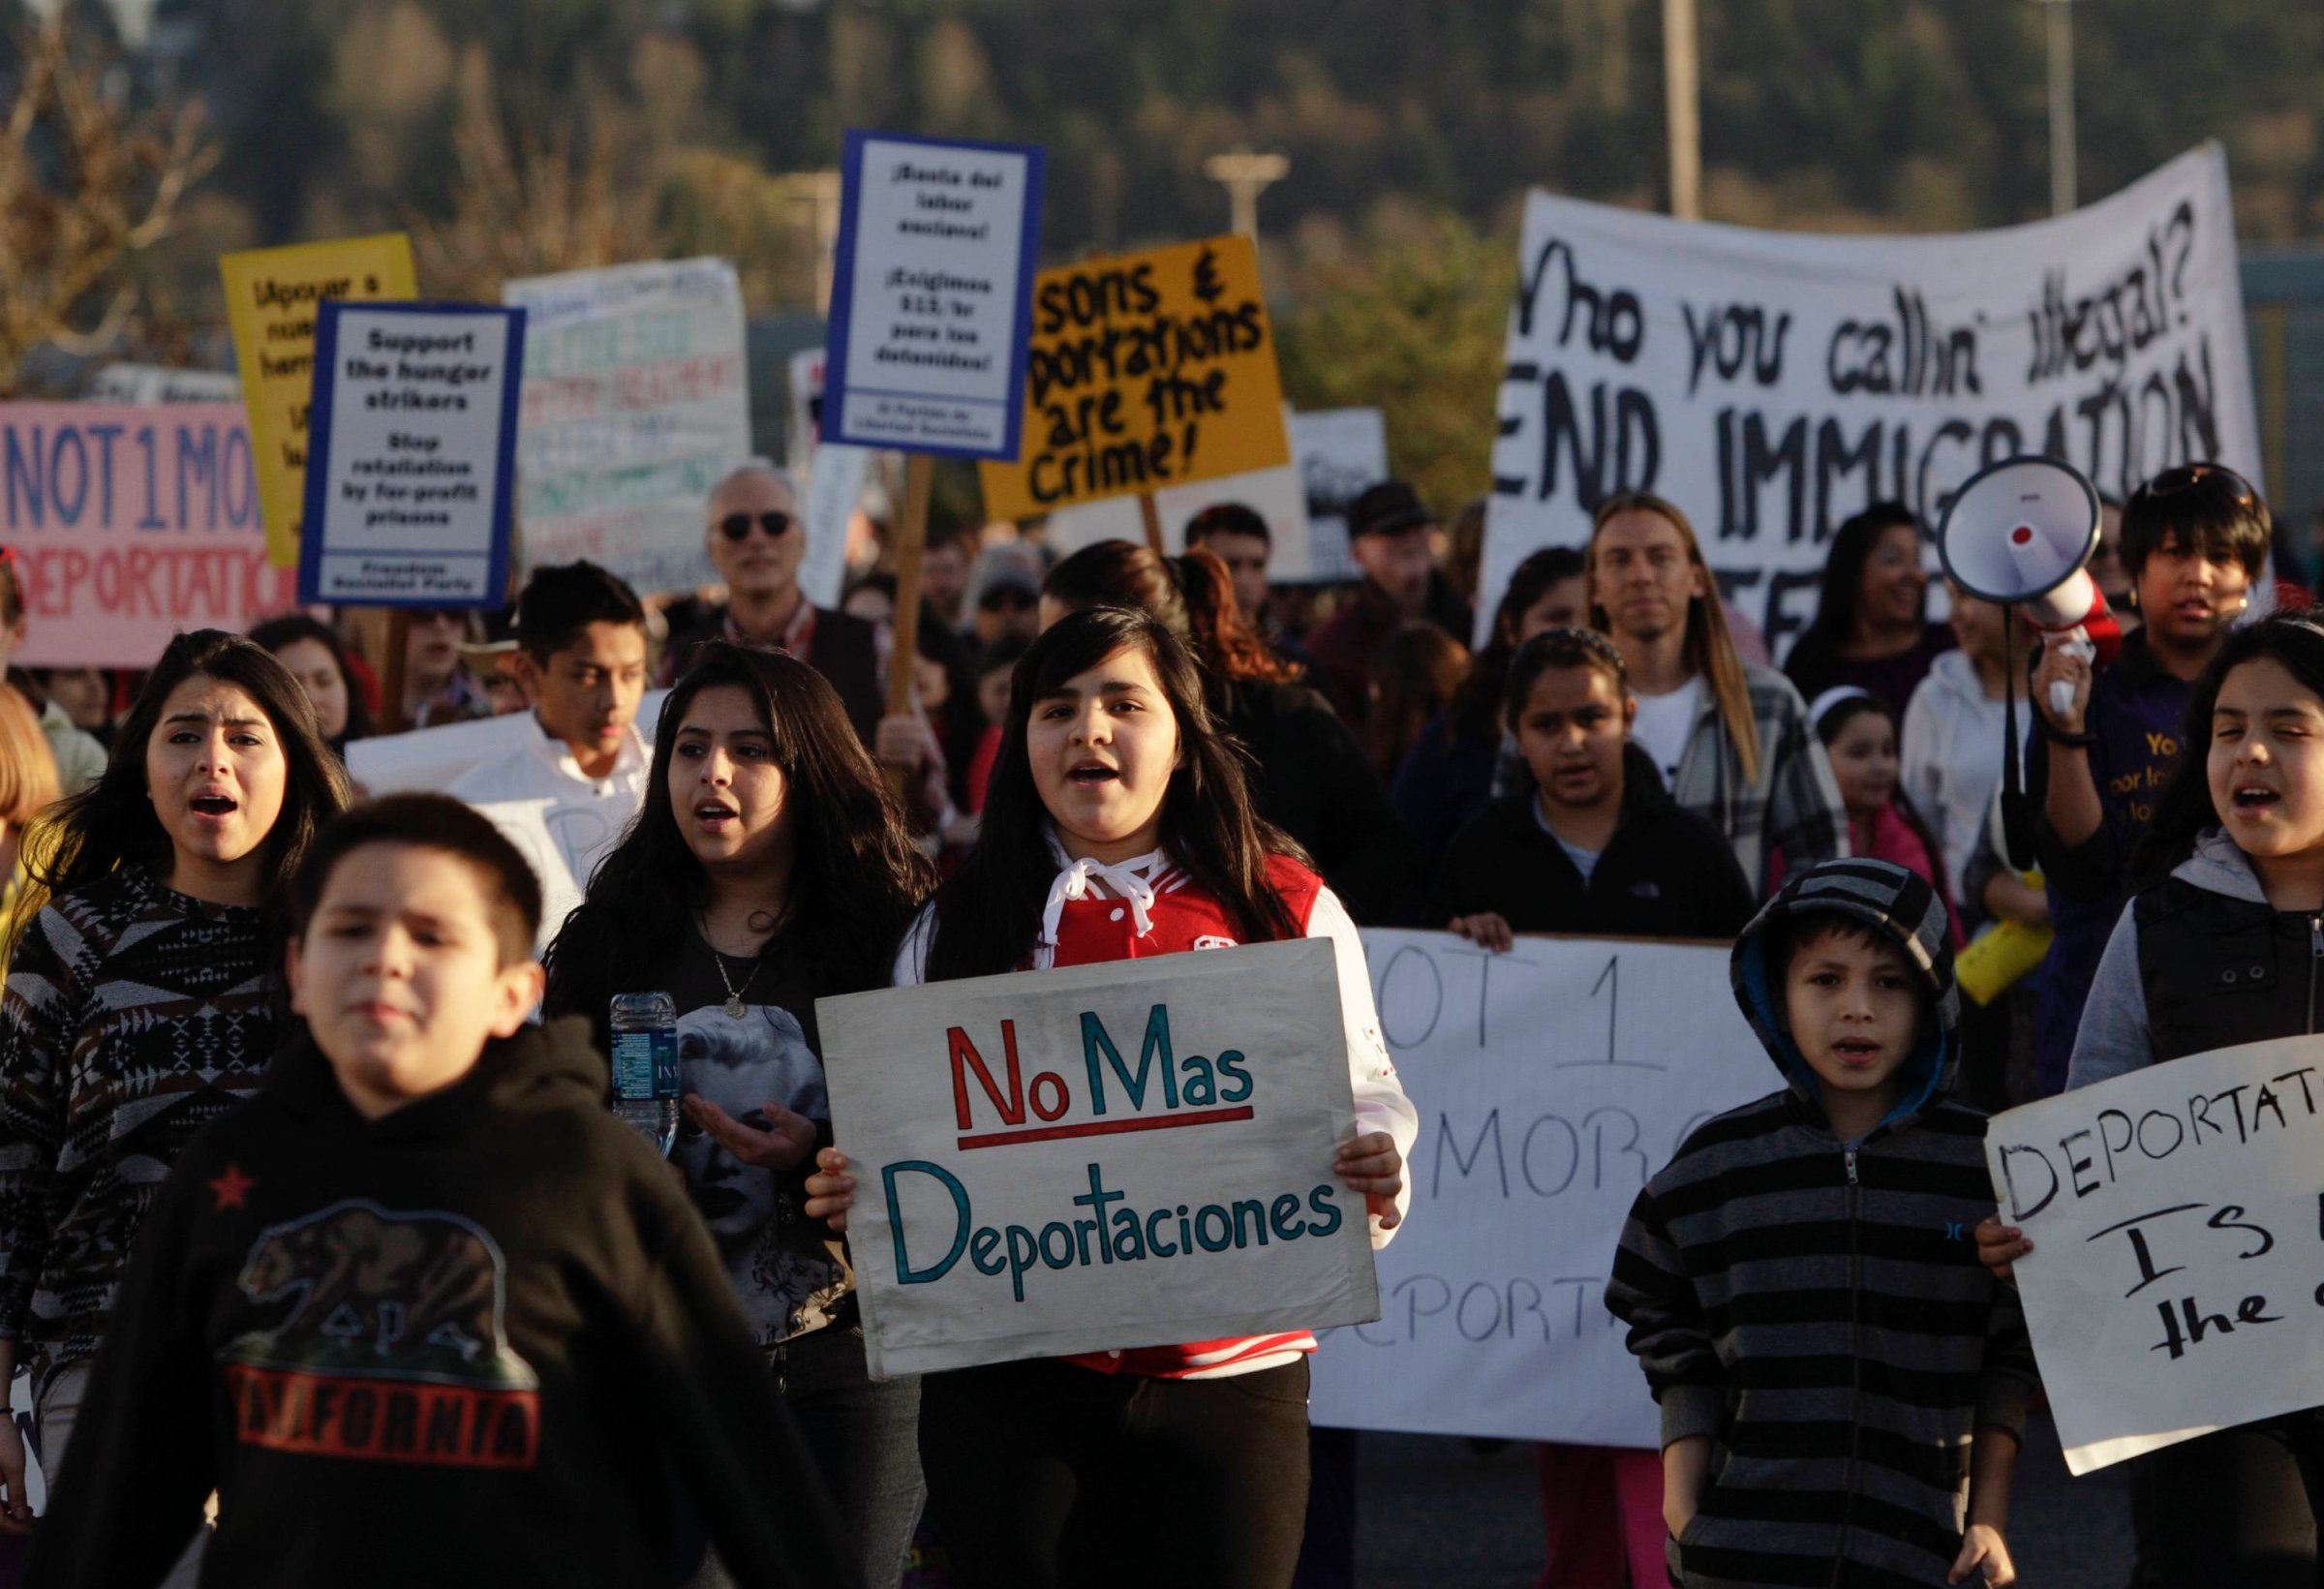 Immigration Reform Rally / Protest in Tacoma, Washington